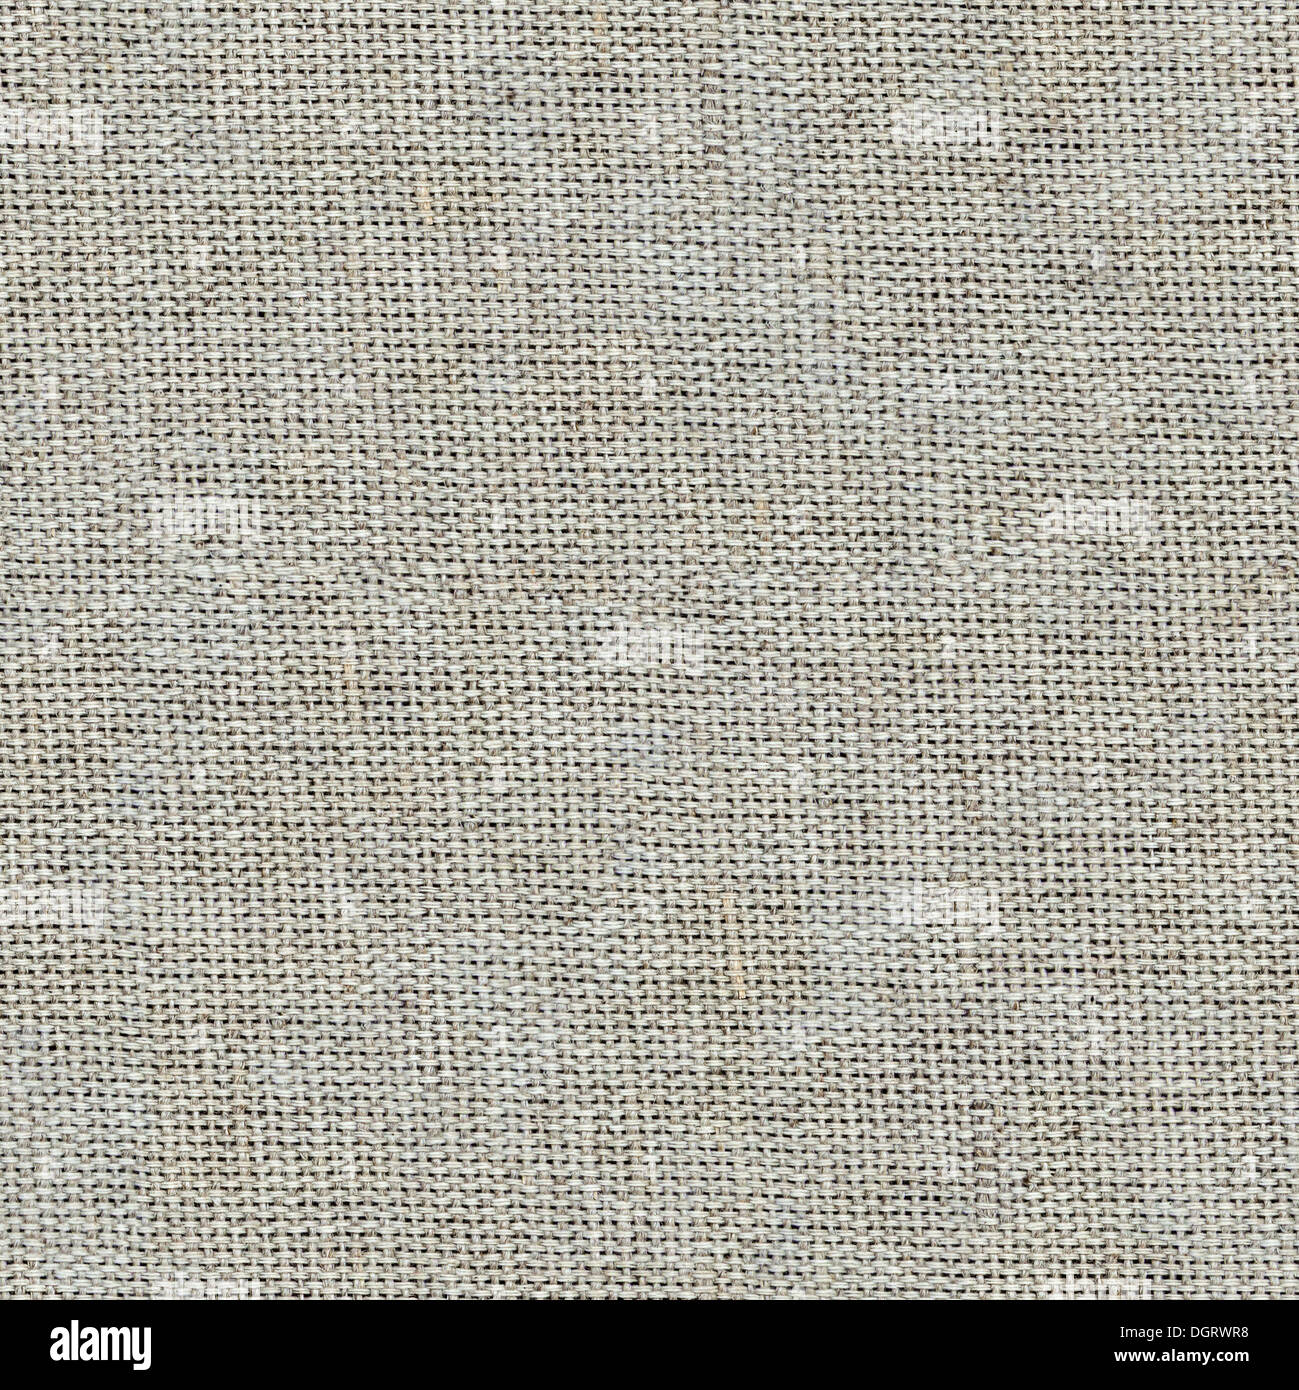 Free Seamless Cotton Fabric Texture Pack